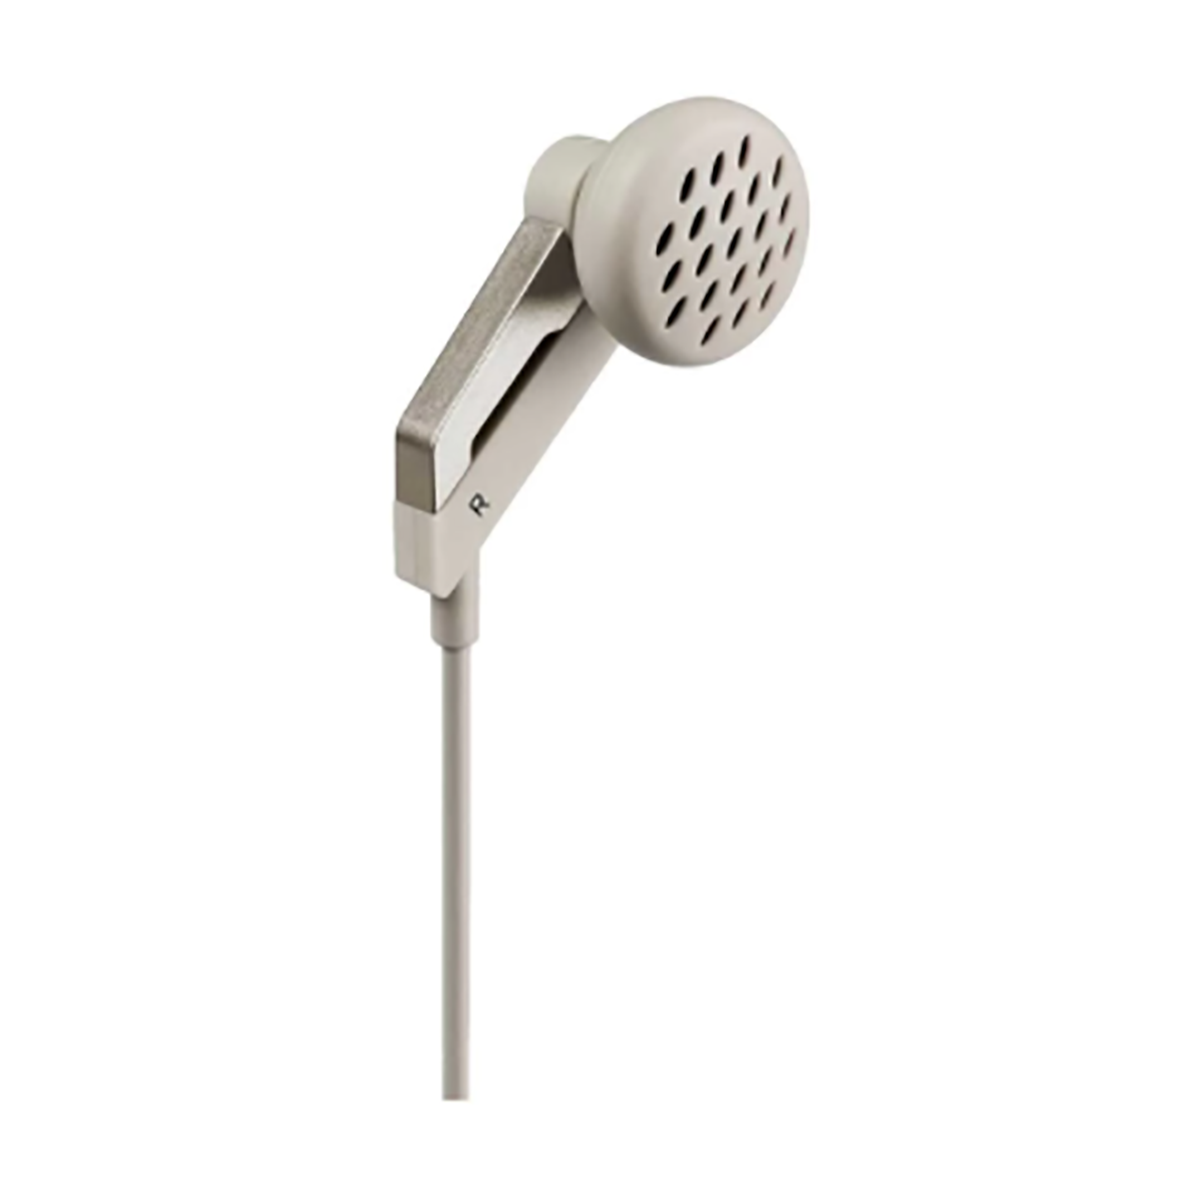 Brand - Edifier, Model - Edifier P186, Type - In-ear Earphone, Connectivity - Wired, Frequency Response - 20Hz - 20KHz, Sensitivity - 101dB, Impedance (ohm) - 32ohm, Microphone - Yes, Plug Type - 3.5mm Jack, Color - Khaki, Feature - Classic ear bud design with HiFi sound, Pauses playback and answers calls, Inline omnidirectional microphone, Others - Connector: 3.5mm, Warranty - 1 Year, Country of Origin - China, Made in/ Assemble - China "Keyword" "edifier p186 wired in ear khaki earphone review" "edifier p186 wired in ear khaki earphone price" "edifier p186 wired in ear khaki earphone settings" "edifier p186 wired in ear khaki earphone replacement"